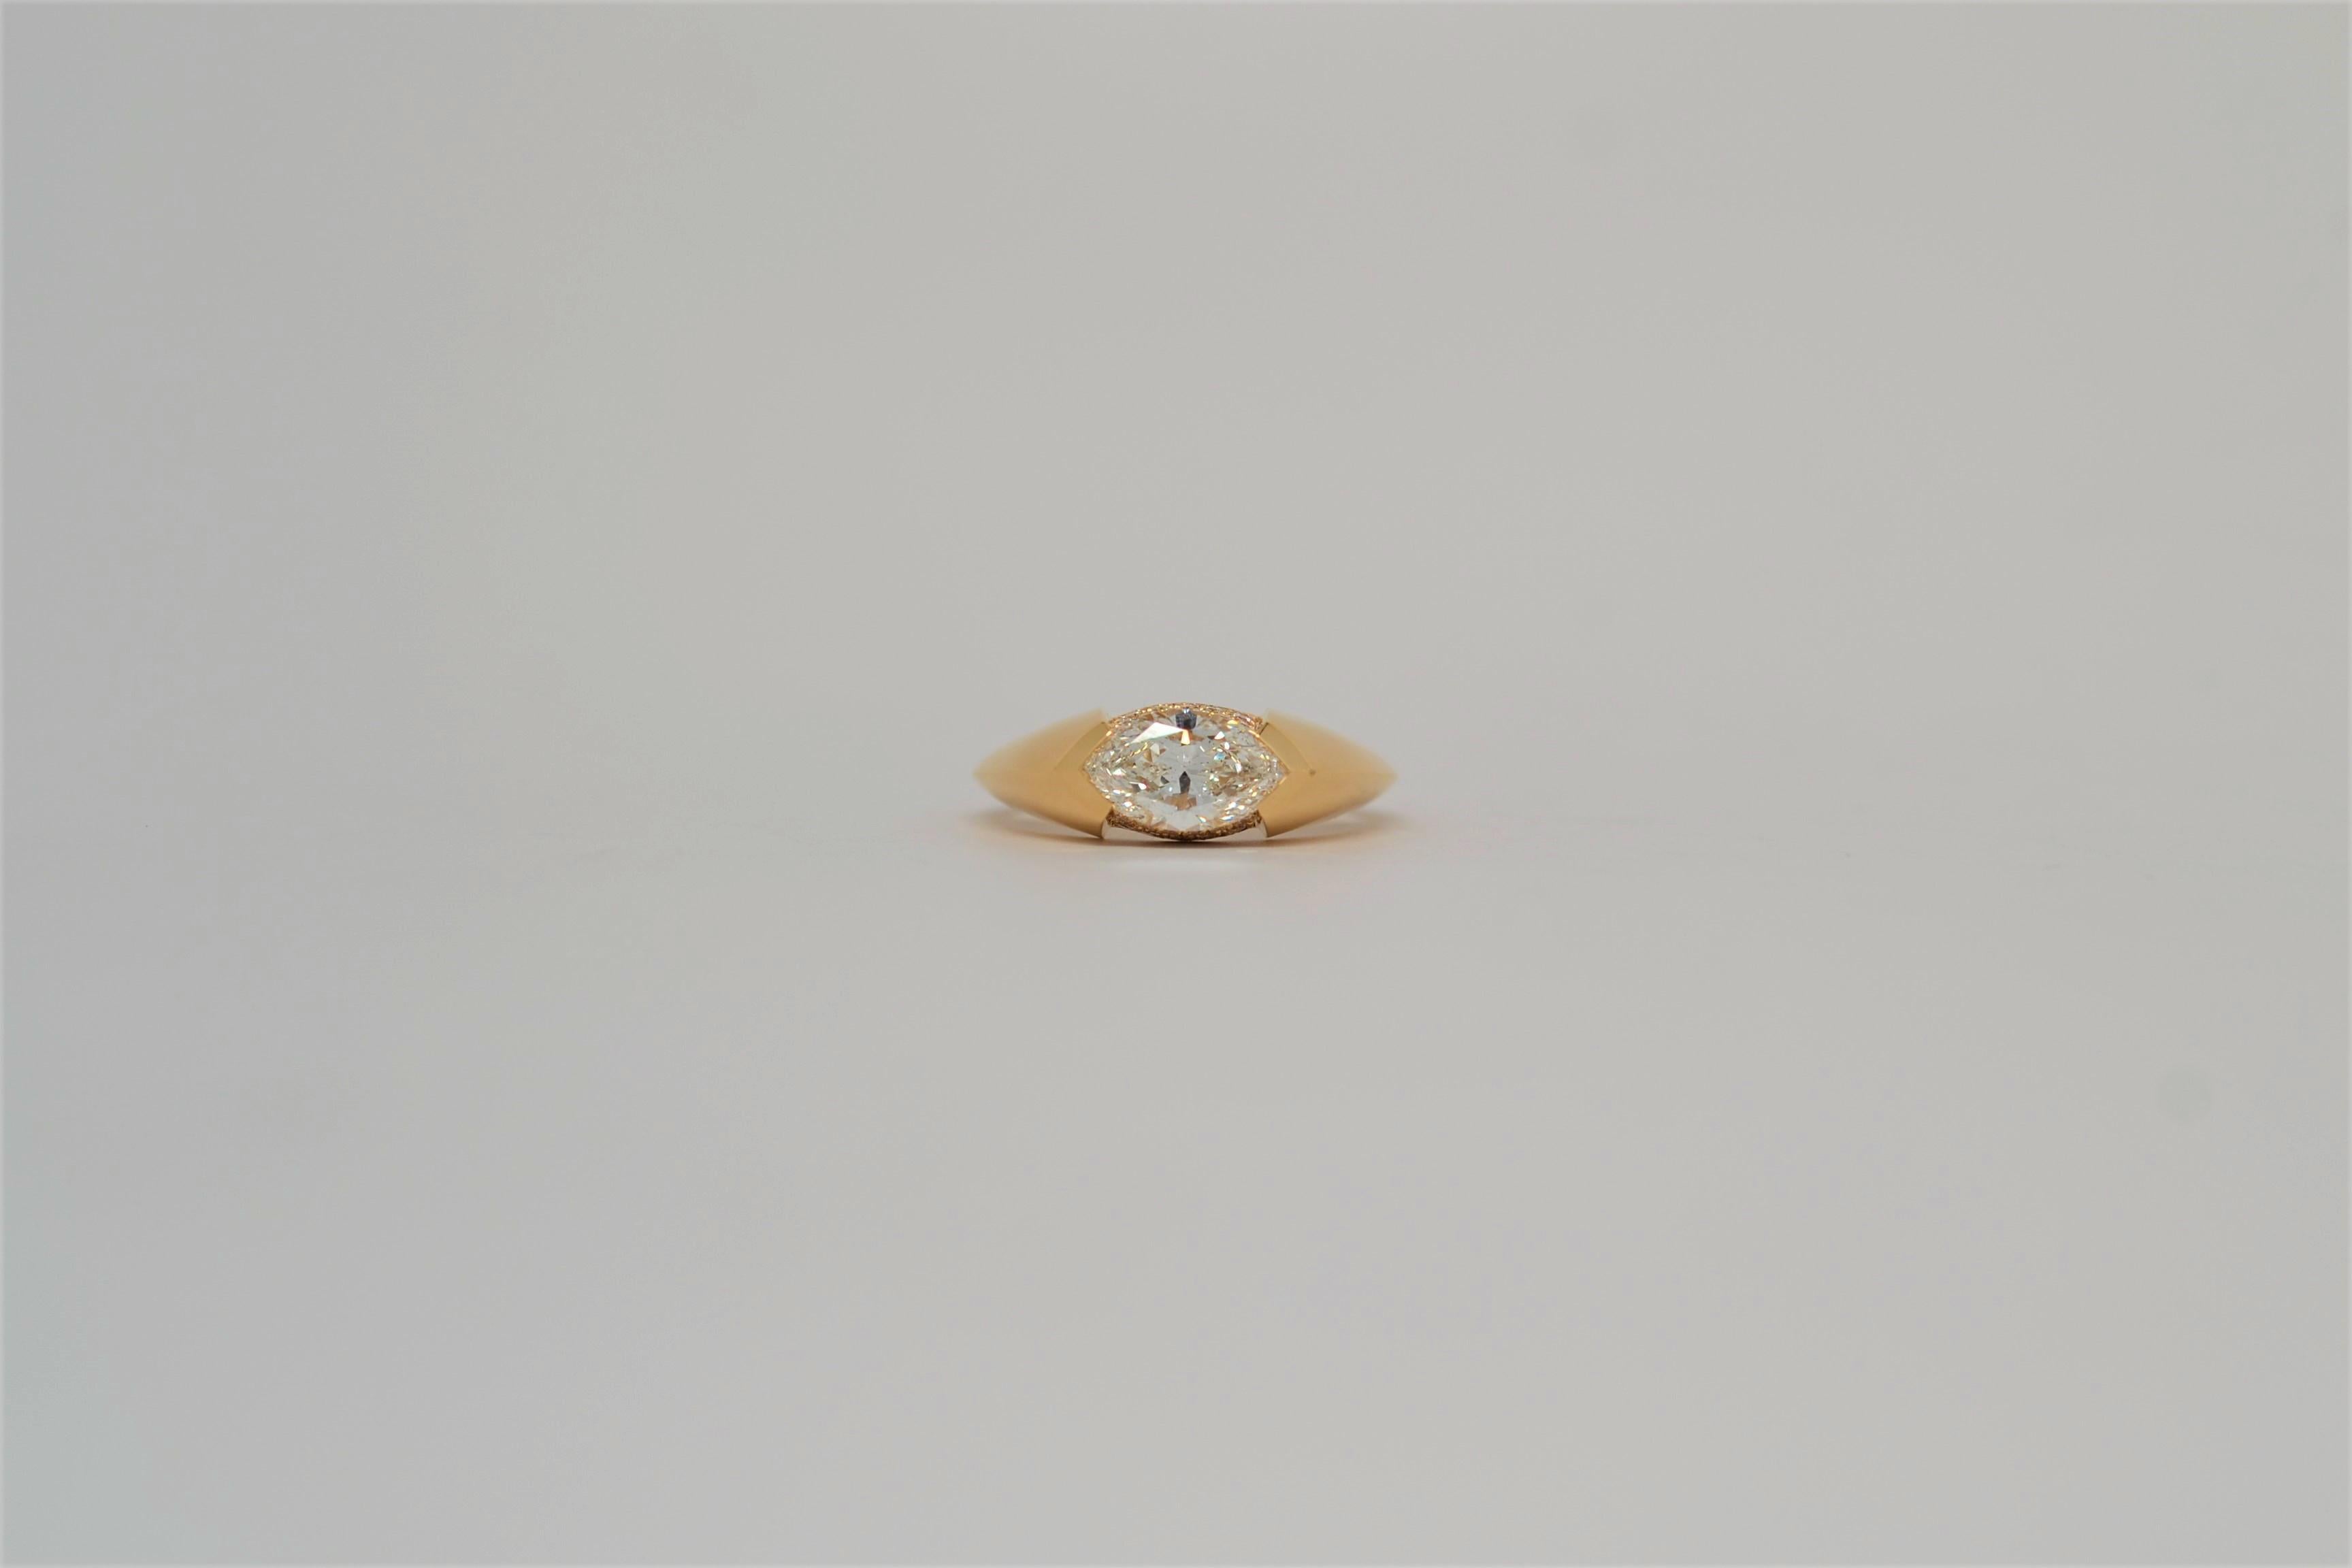 This handmade ring is set in 18K Yellow Gold with a Marquise Brilliant Cut Diamond set in an East-West layout. The center diamond is hand set with chevron shaped channels and a knife edge shank. 
Thirty four Round Brilliant Cut Diamonds are bead set